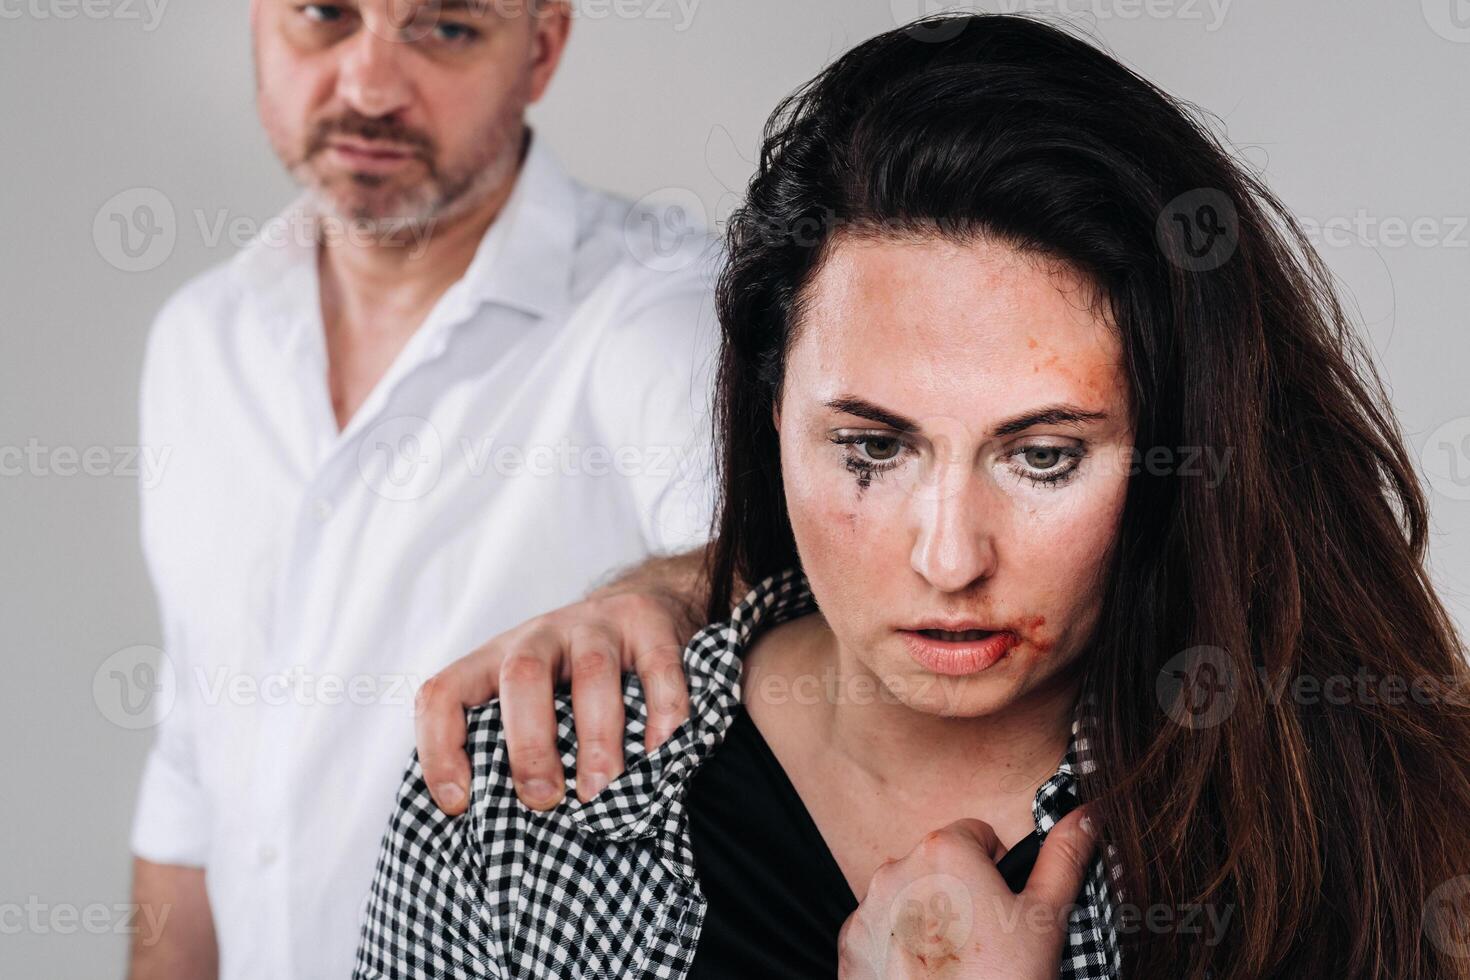 A woman beaten by her husband standing behind her and looking at her aggressively. Domestic violence photo